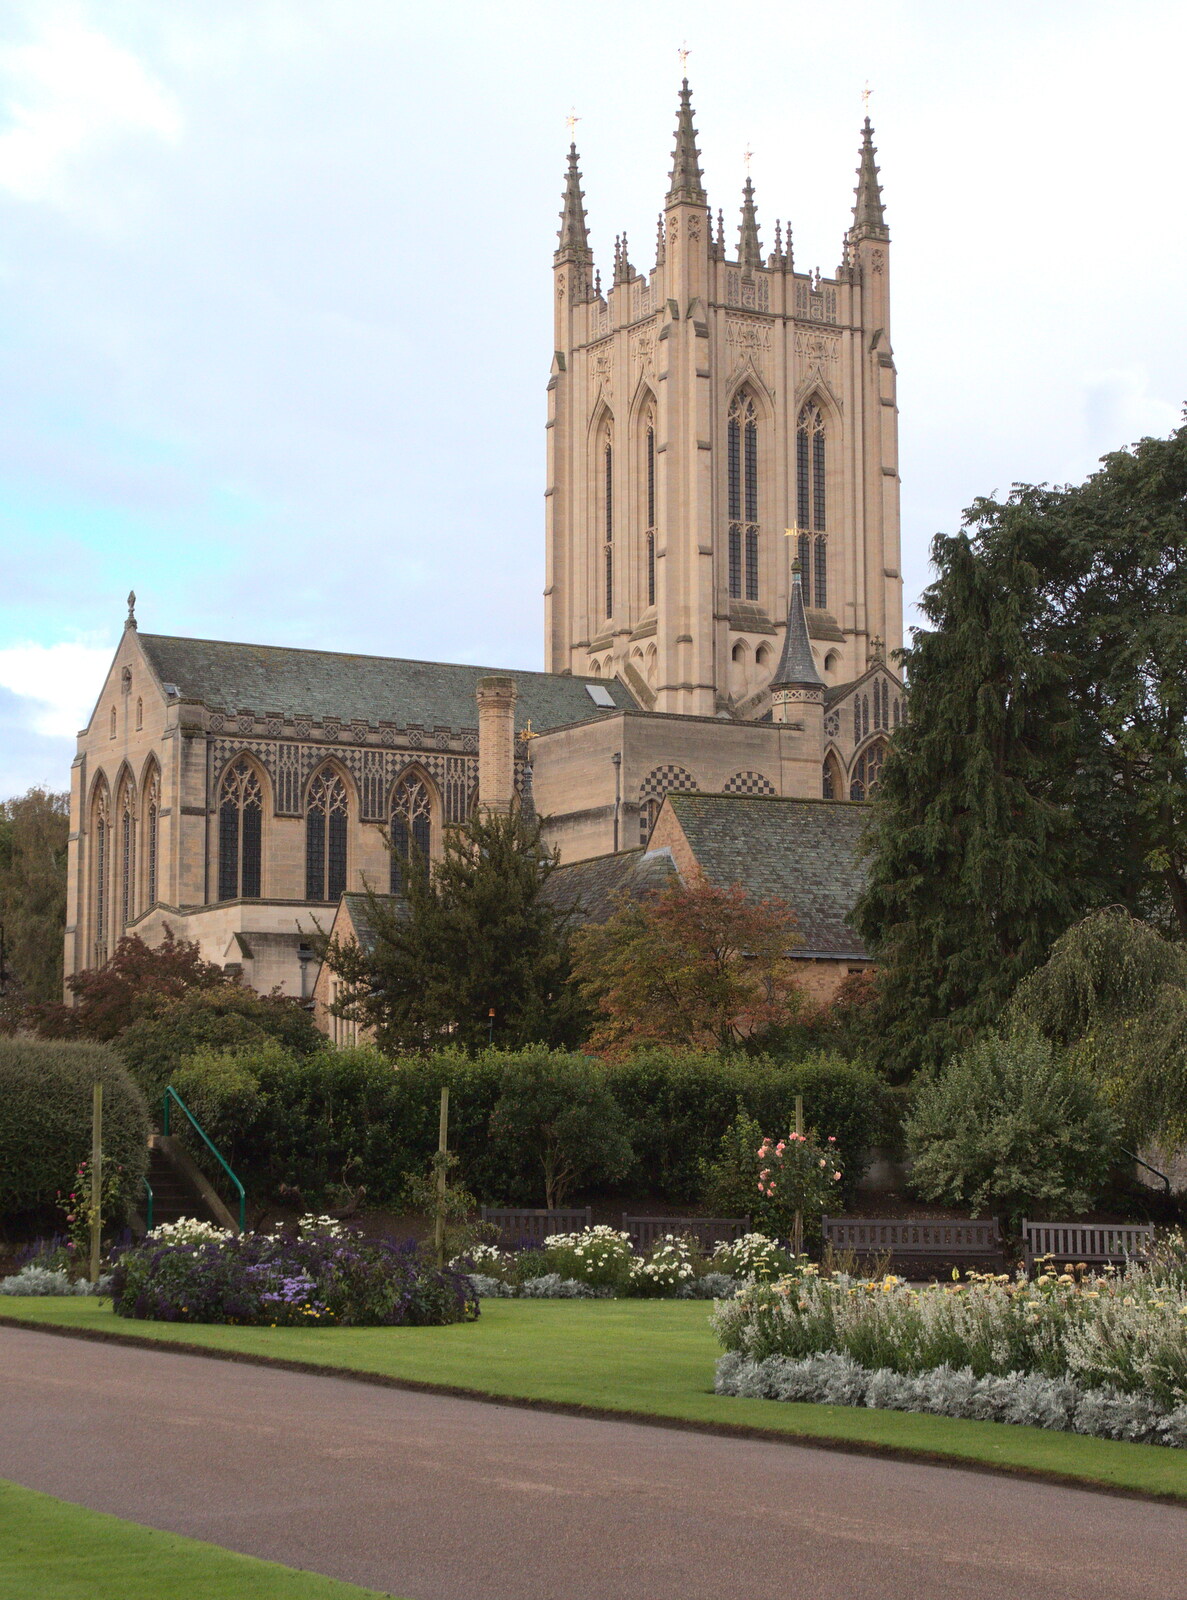 The cathedral, seen from Abbey Gardens from Ploughing and Pizza, Thrandeston and Bury St. Edmunds, Suffolk - 17th September 2017